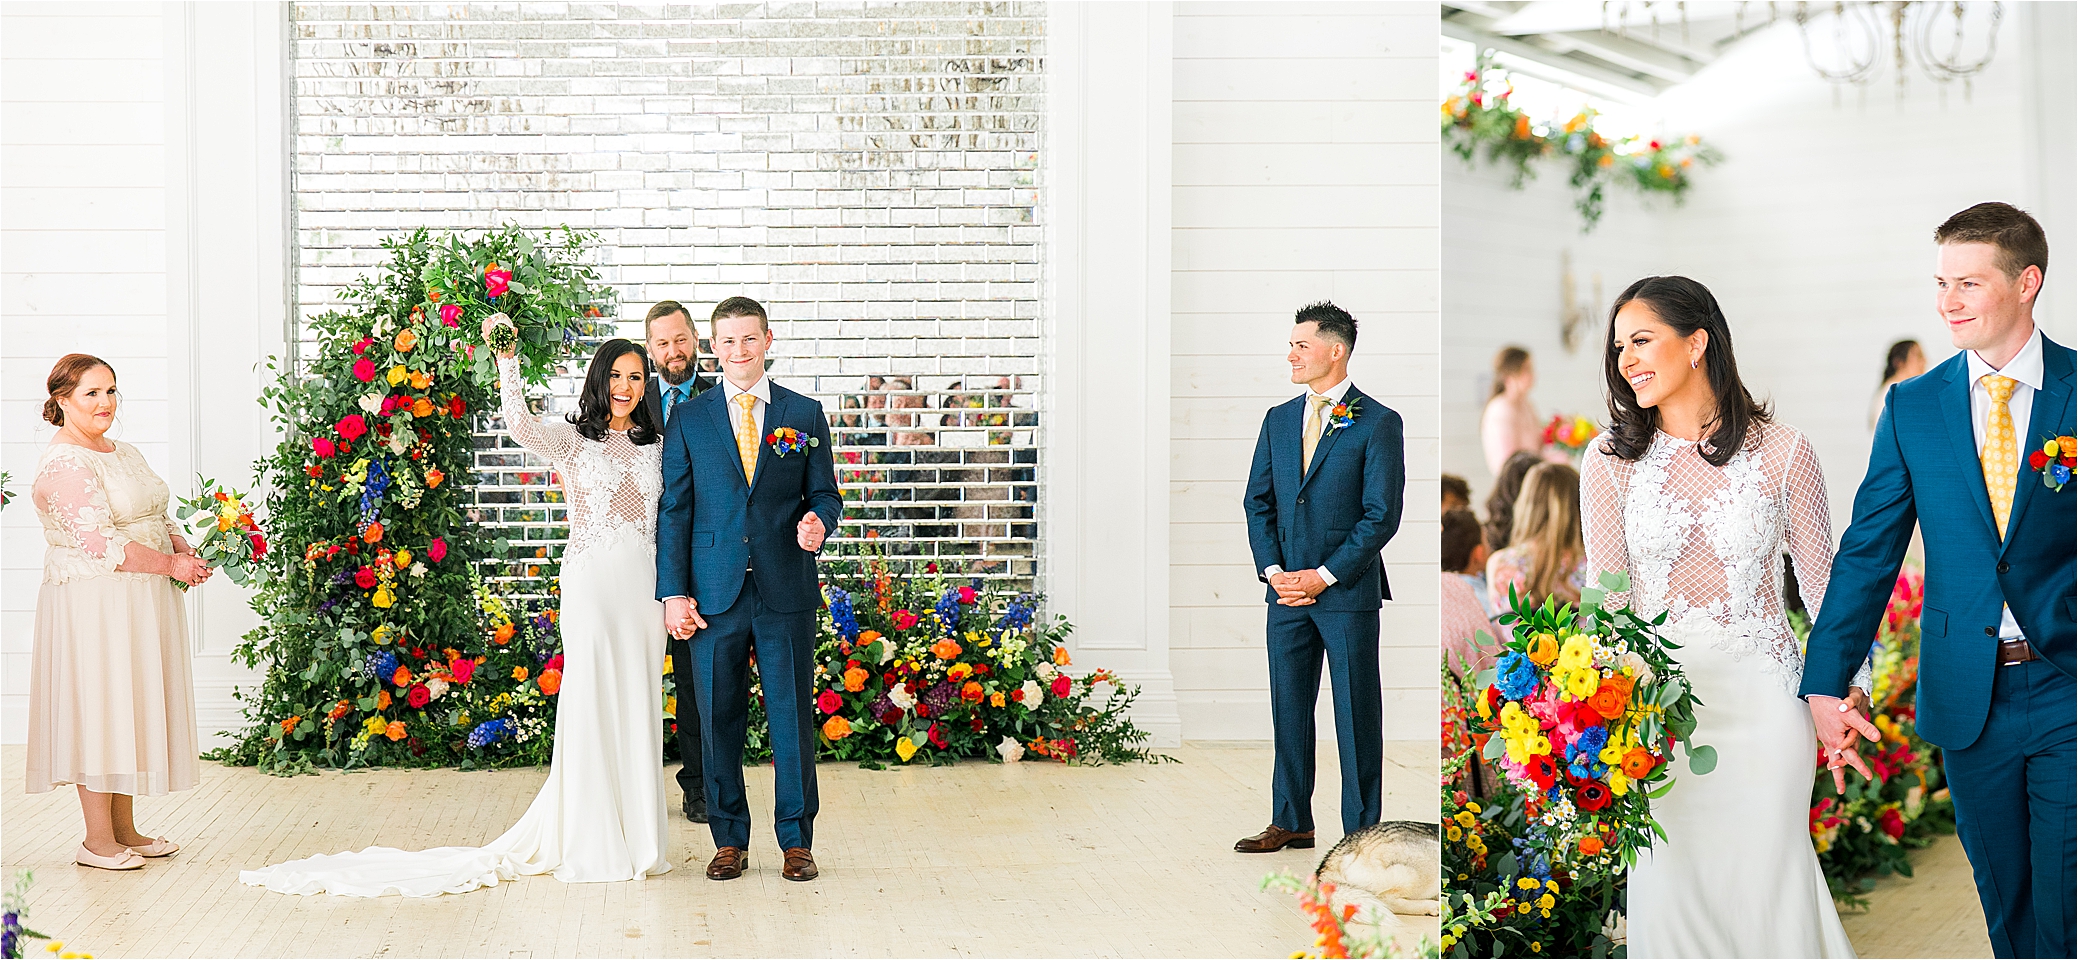 A couple with much excitement after they are pronounced husband and wife during their bright, colorful ceremony at Pineway Farms 